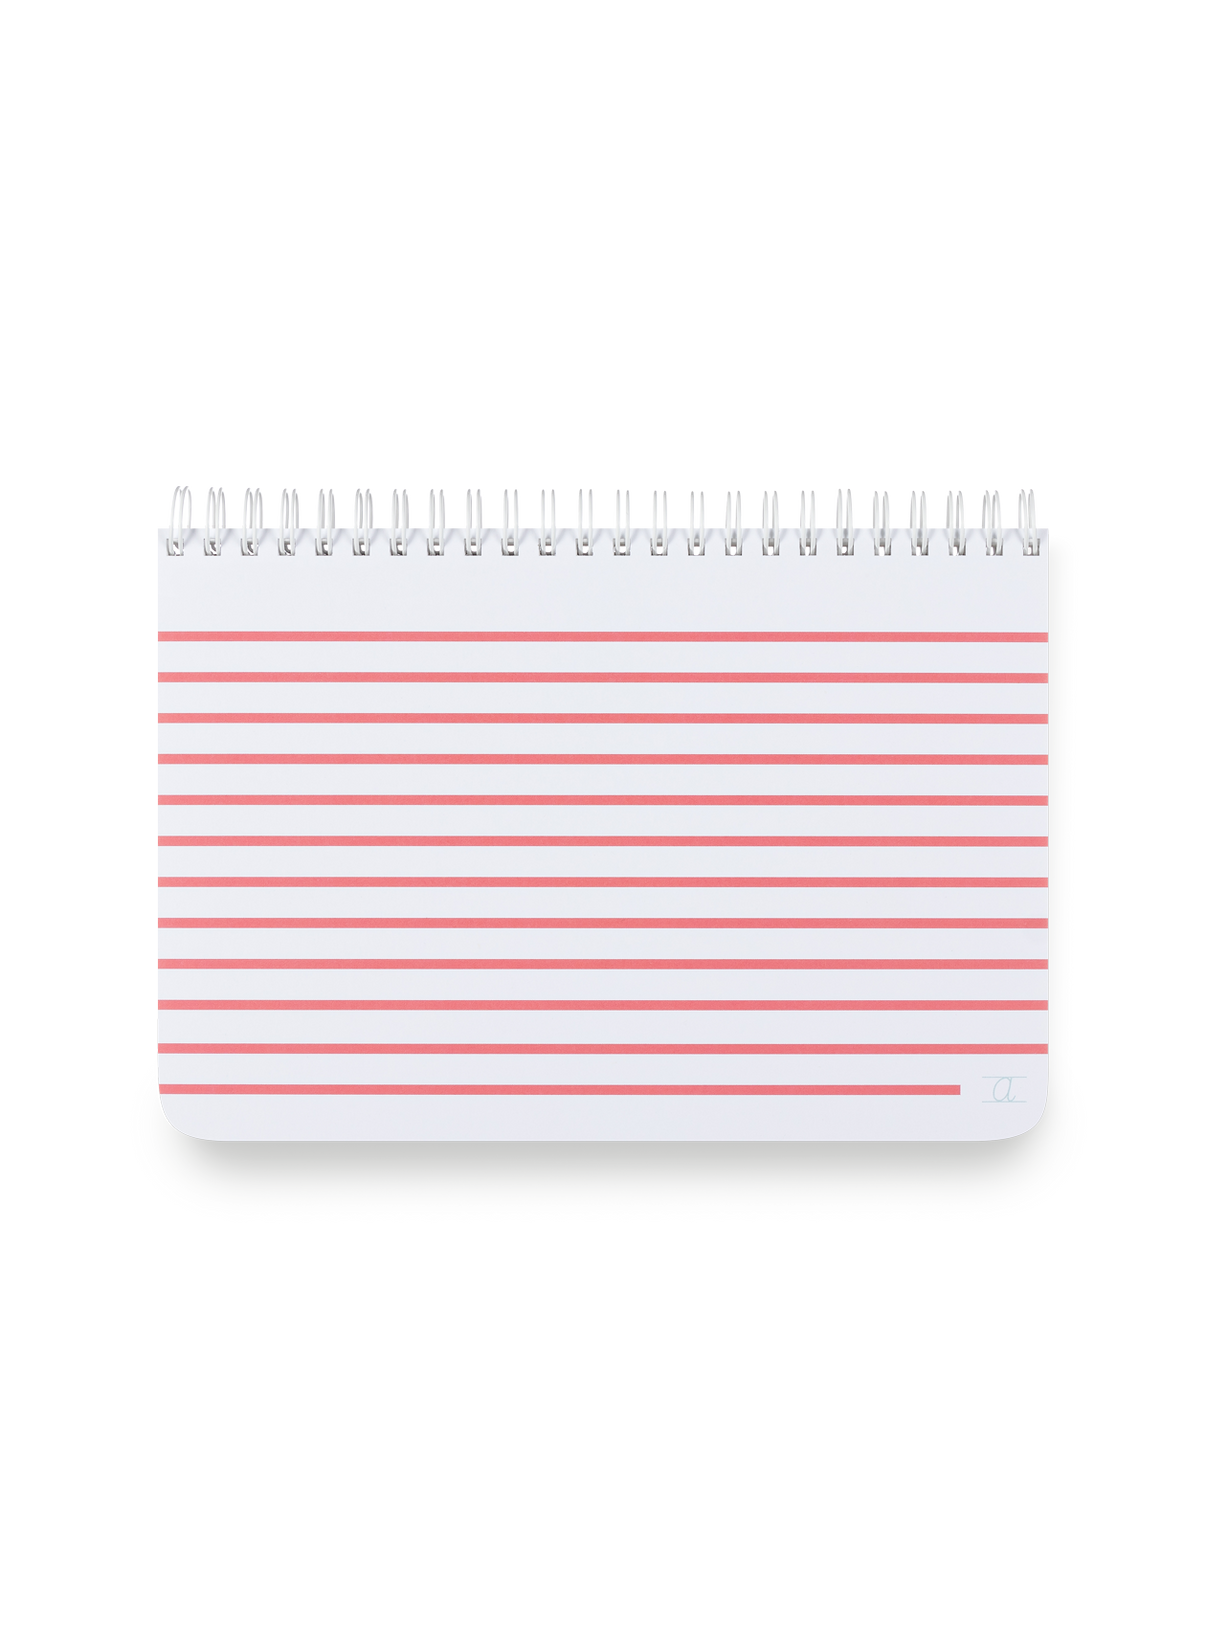 Appointed Kids Spiral Sketchpad in Poppy with white wire-o binding front view II Poppy